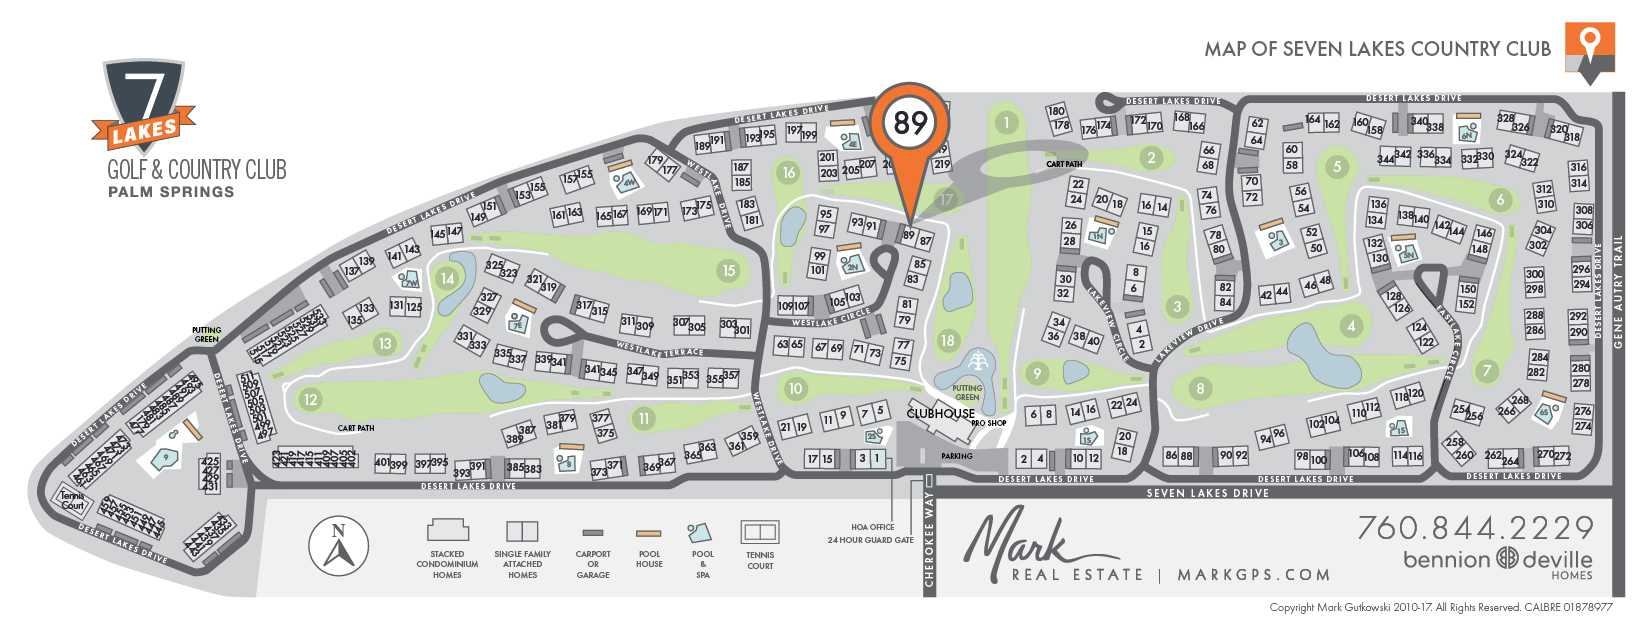 Seven Lakes Country Club Map | Palm Springs Real Estate